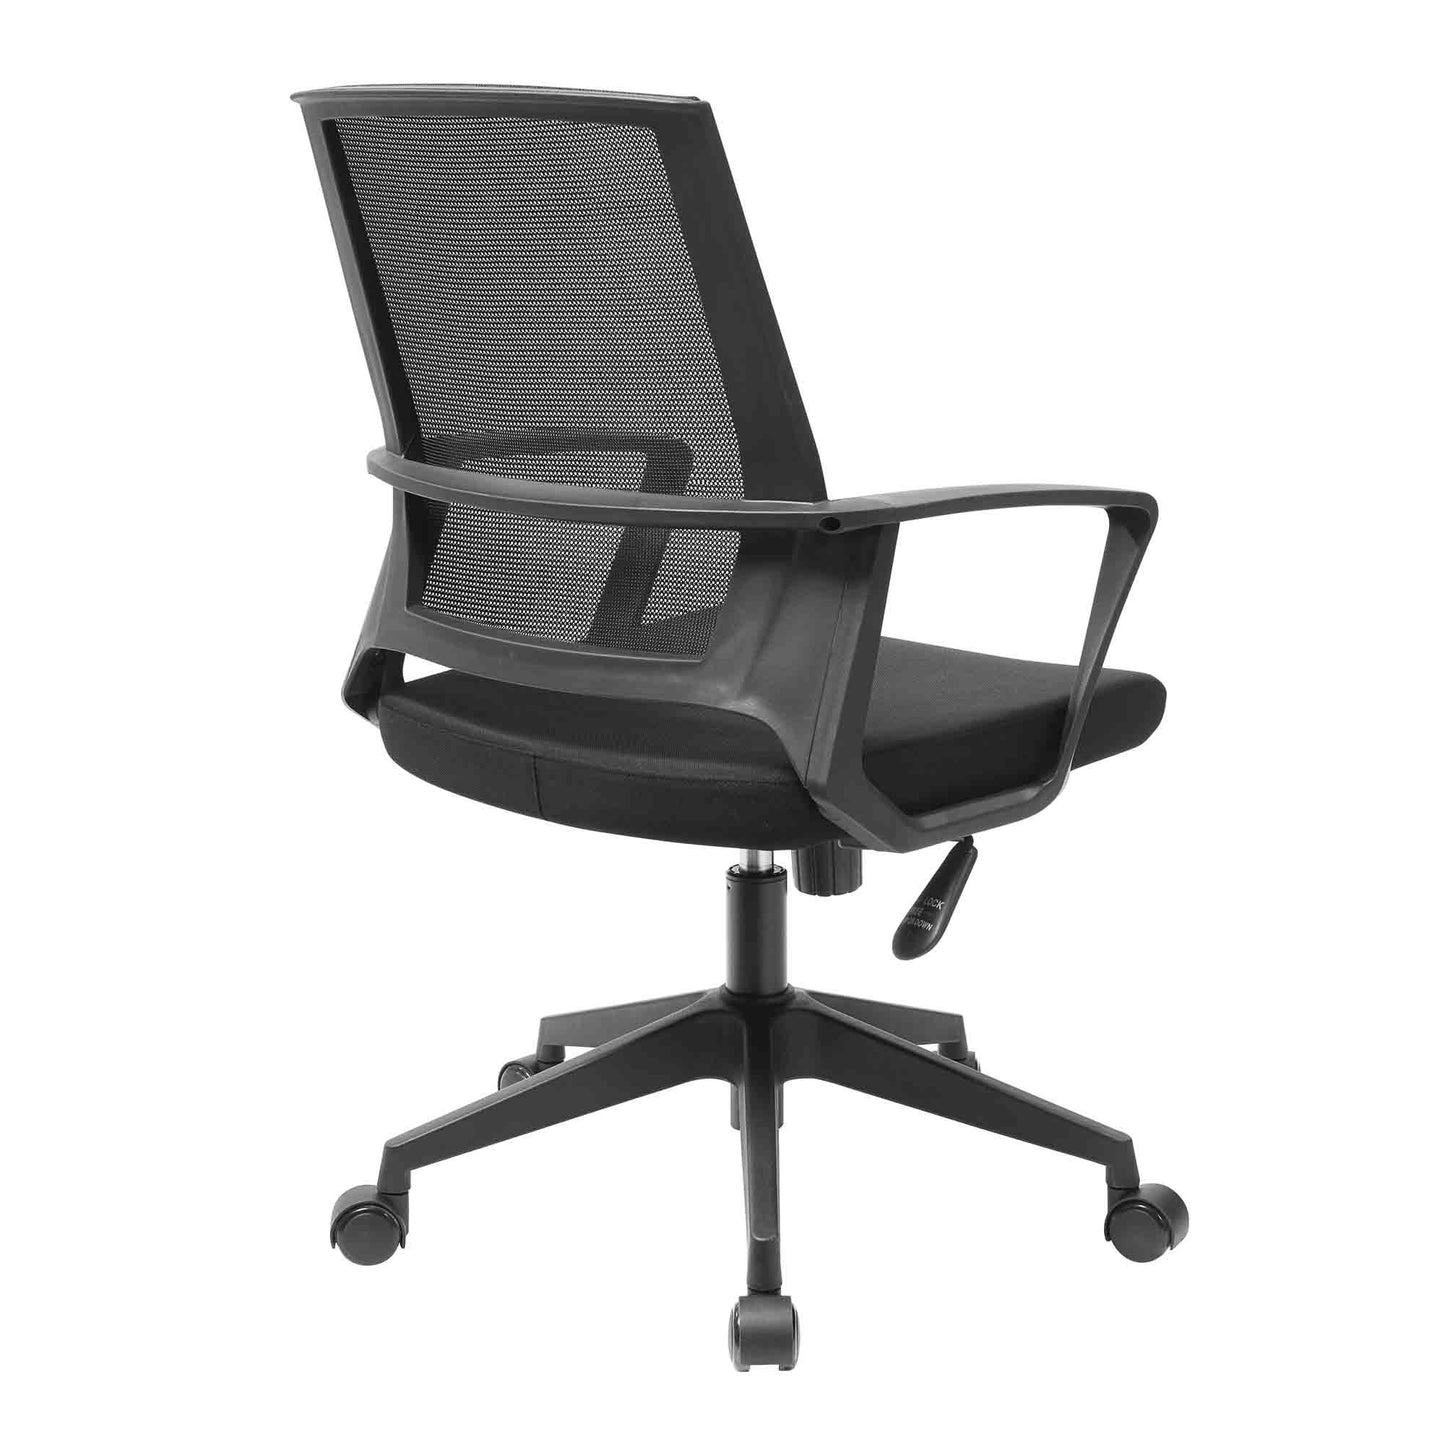 Office Chair - mch0017